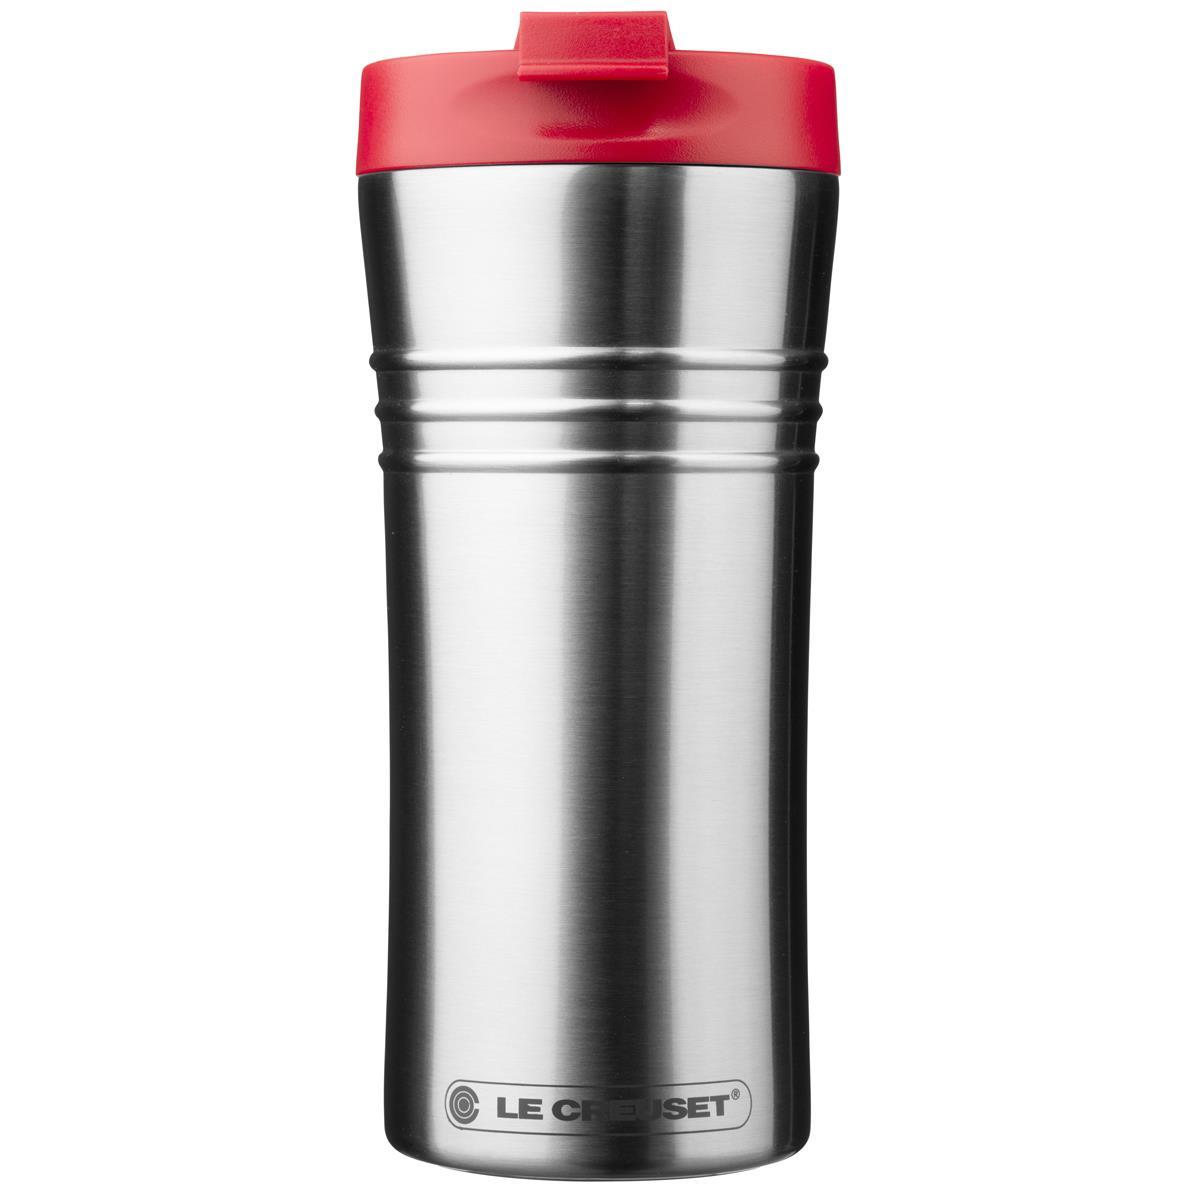 Can the le Creuset travel mug be safely cleaned in a dishwasher?